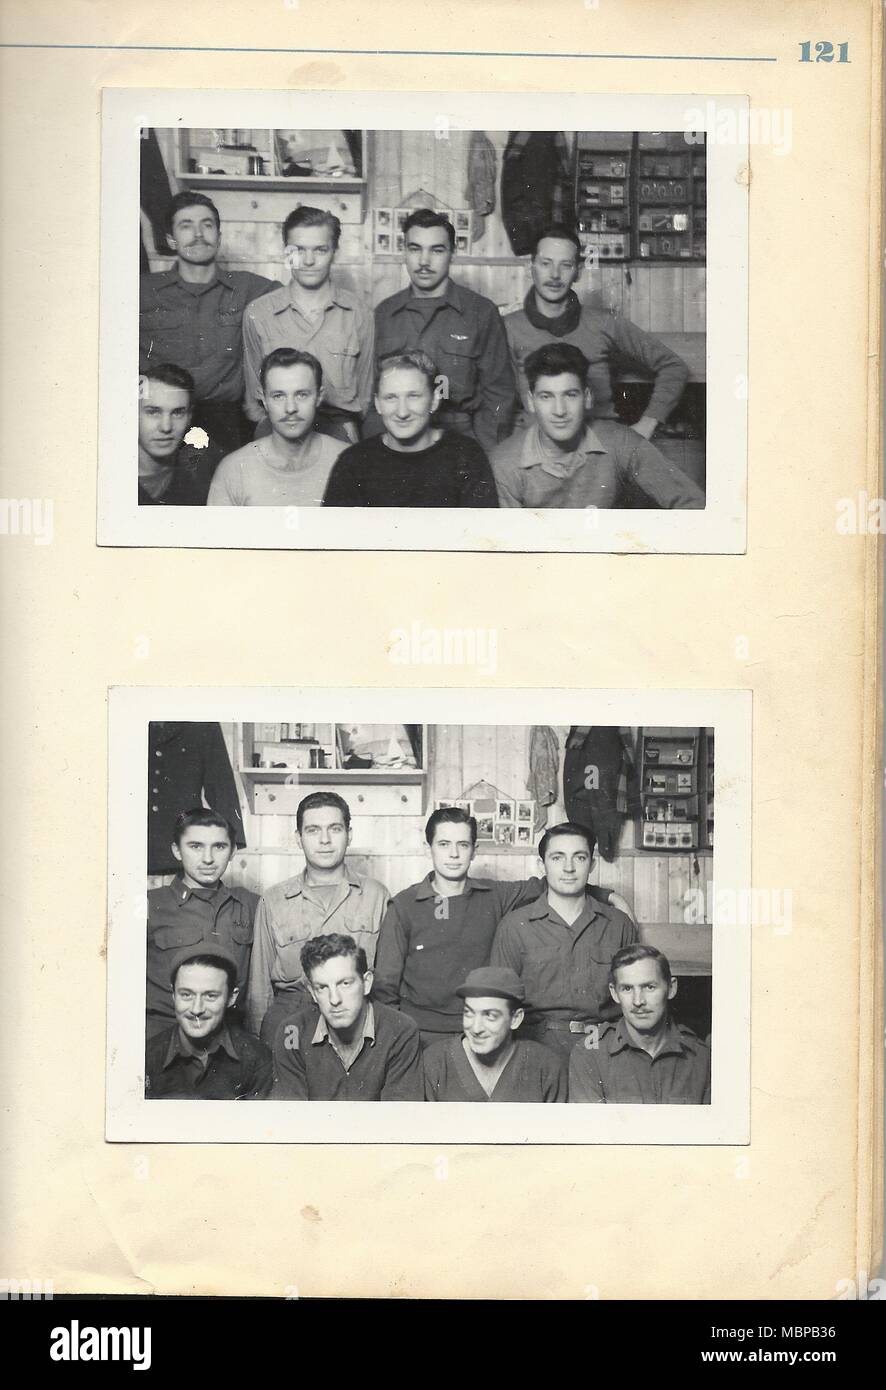 Photos of 1st Lt. Bill Moore, a fighter pilot assigned to the 339th Fighter Group, Fowlmere, England, and other prisoners of war from Stalag Luft 1, Barth, Germany. Moore was shot down over Germany on Sept. 13, 1944, and held as a POW until the war in Europe ended and the camp was liberated by the Russians in May, 1945. (Photo courtesy of Linda Moore) Stock Photo